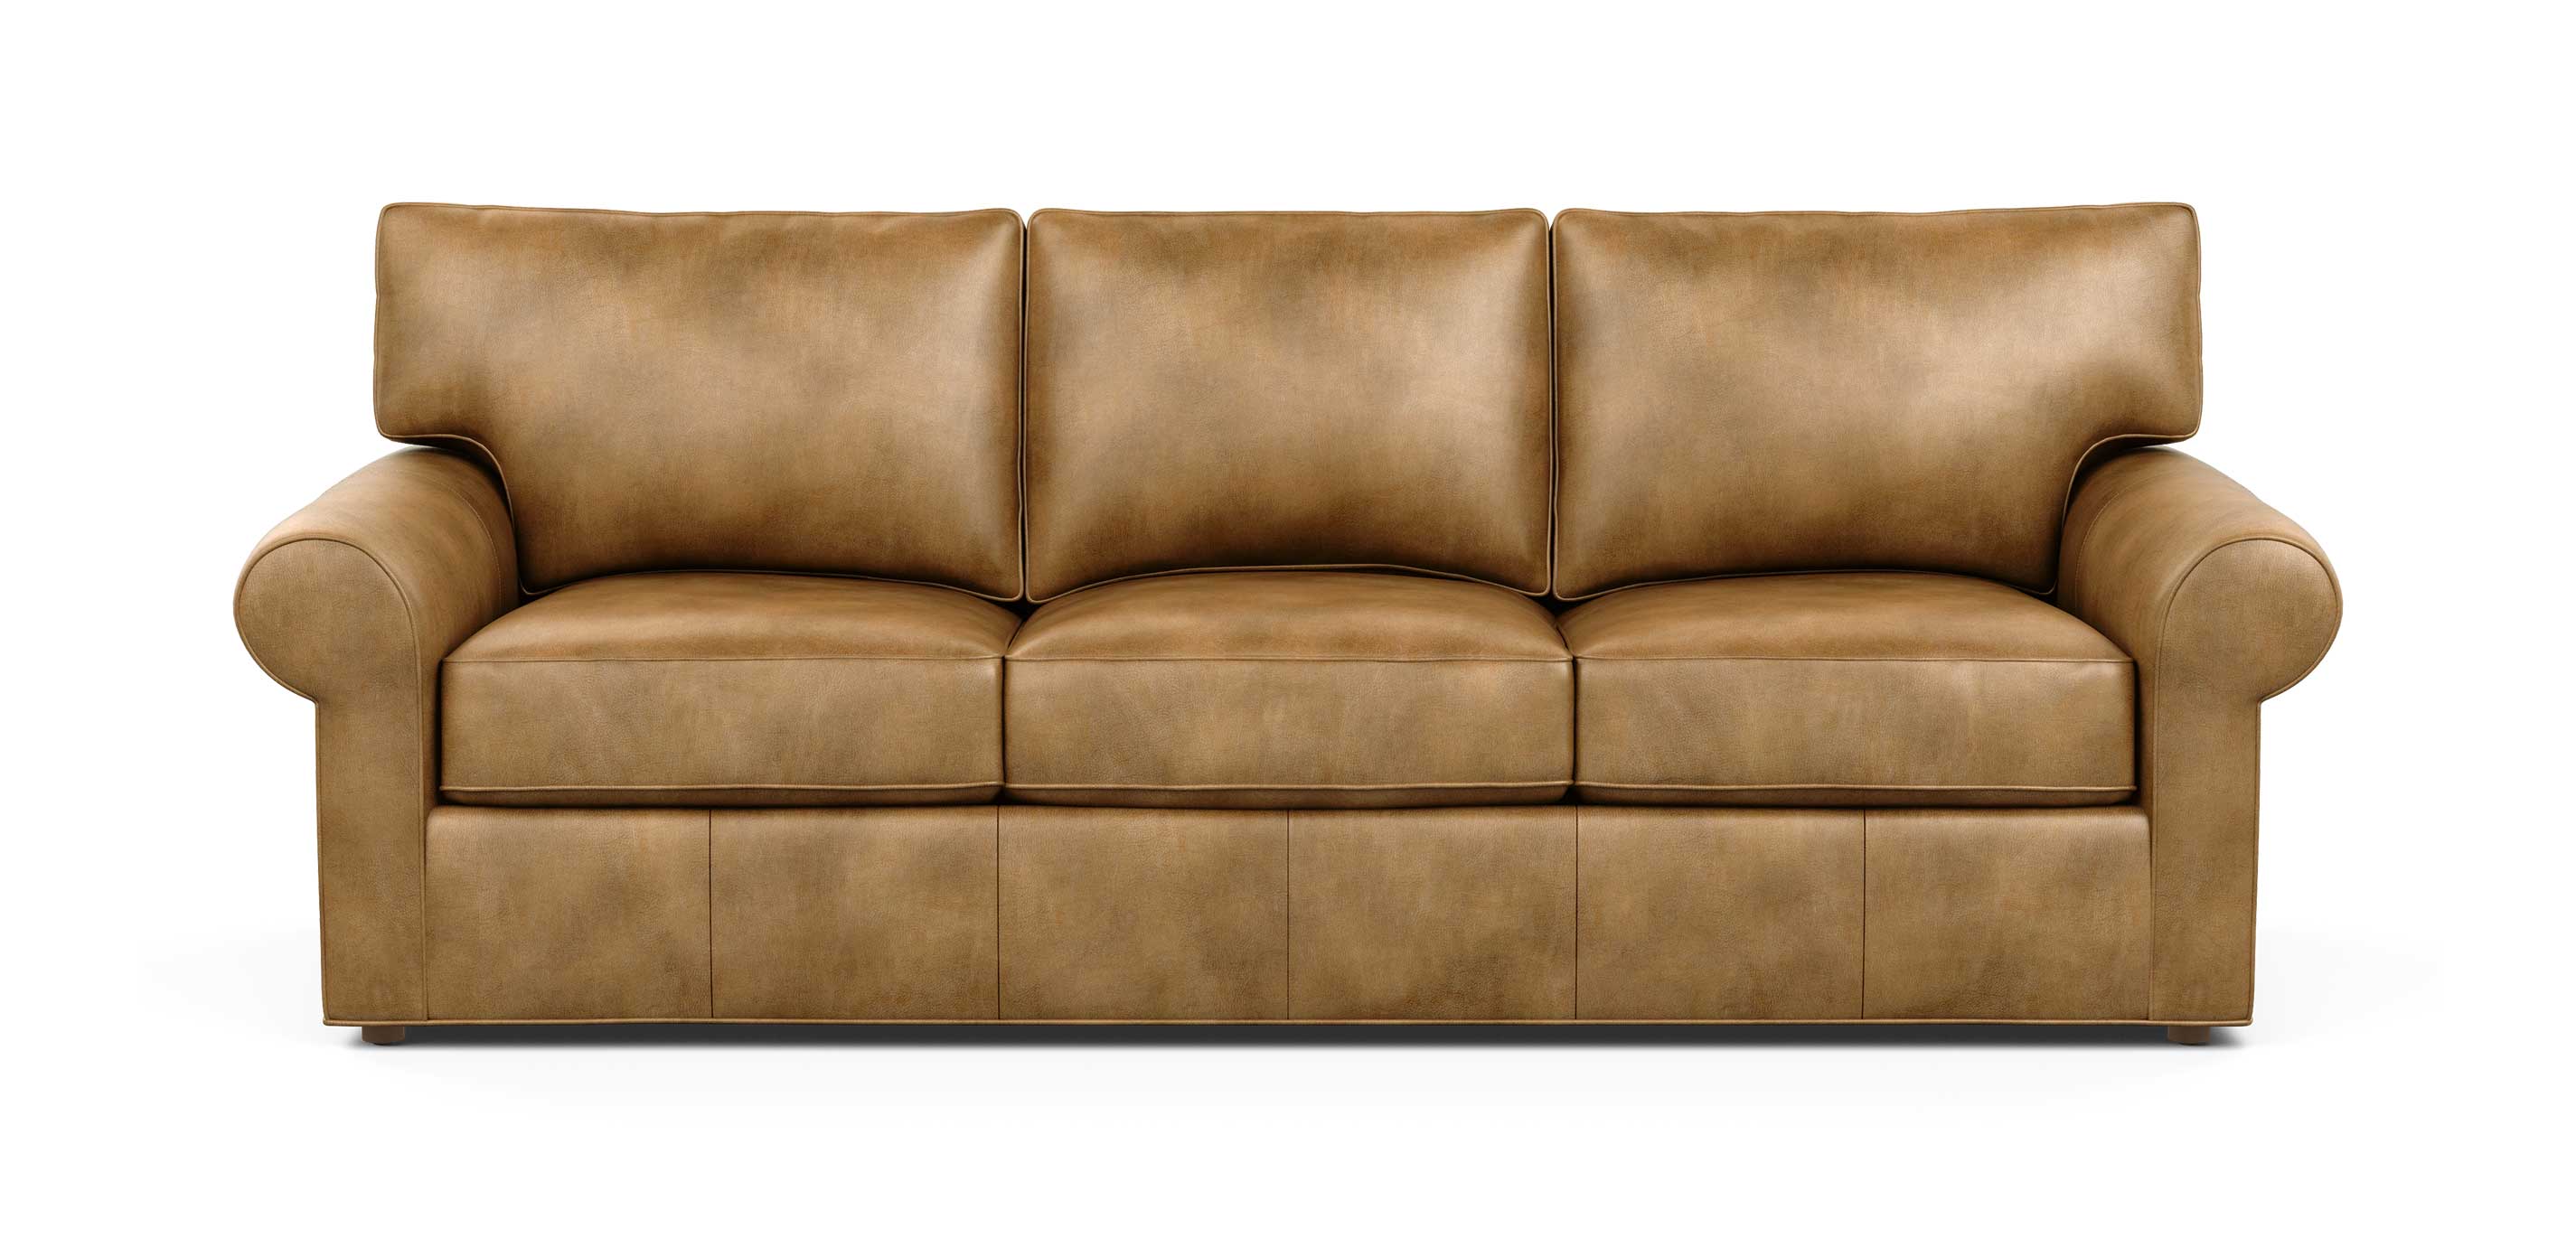 76 rolled arm leather sofa